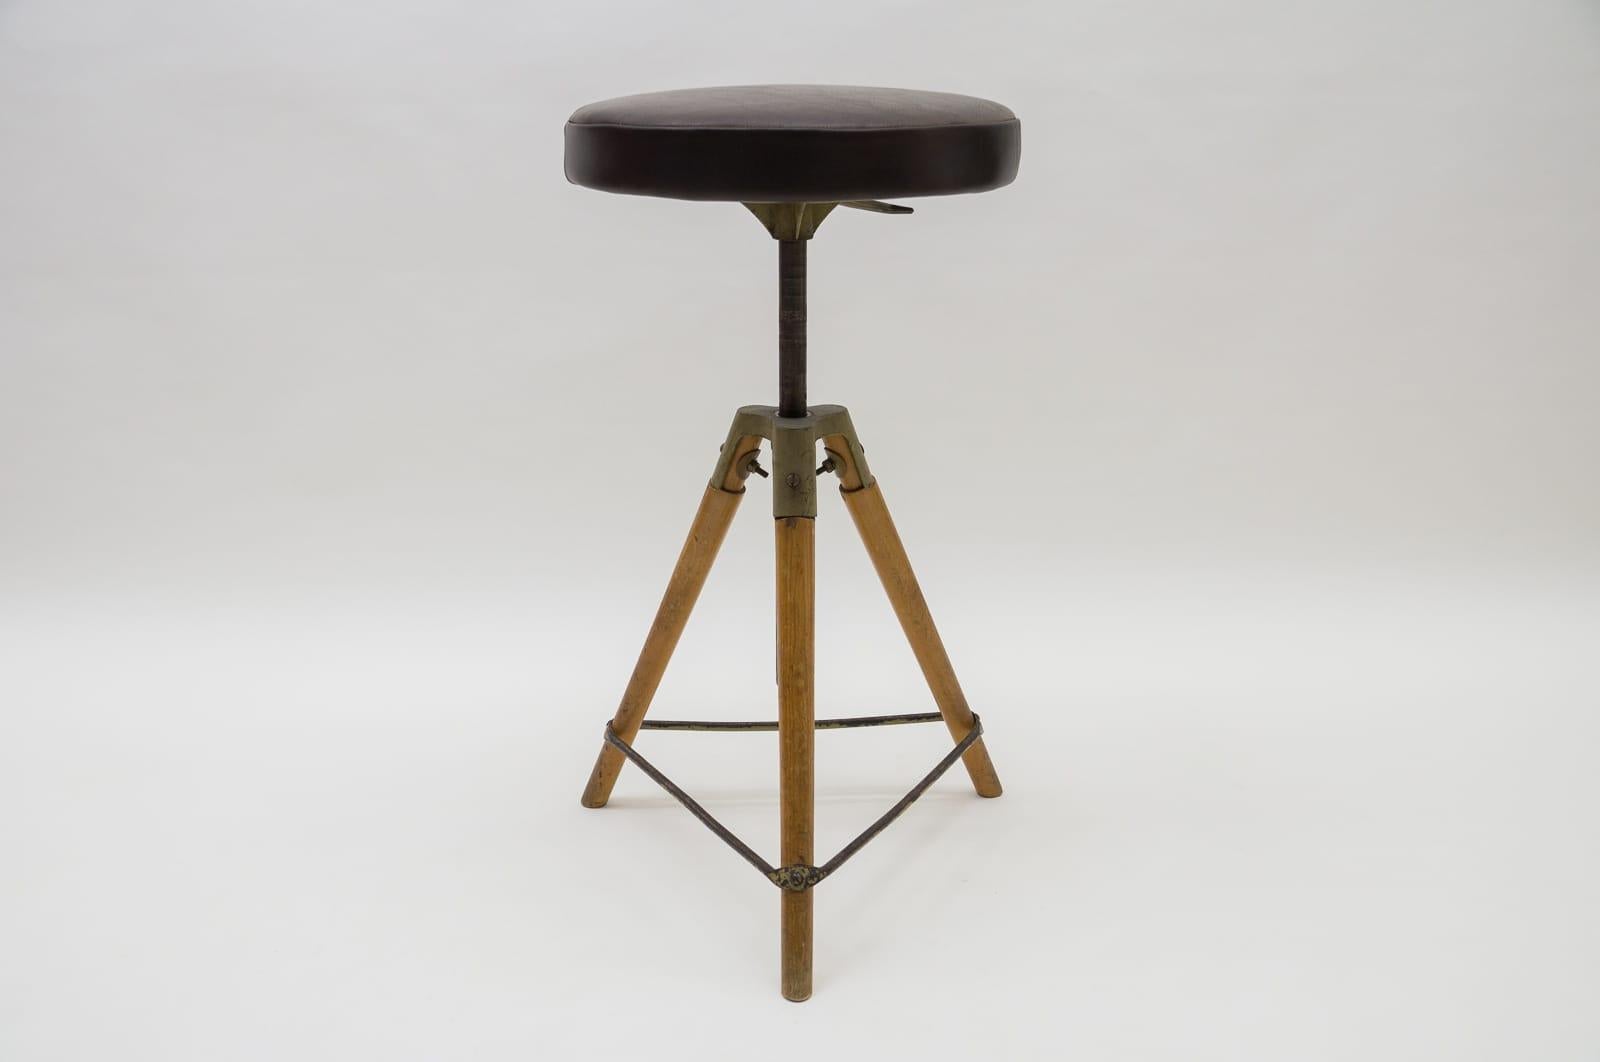 Mid-20th Century Mid-Century Modern Adjustable Swiss Stool in Leather Metal and Wood, 1940s/50s For Sale